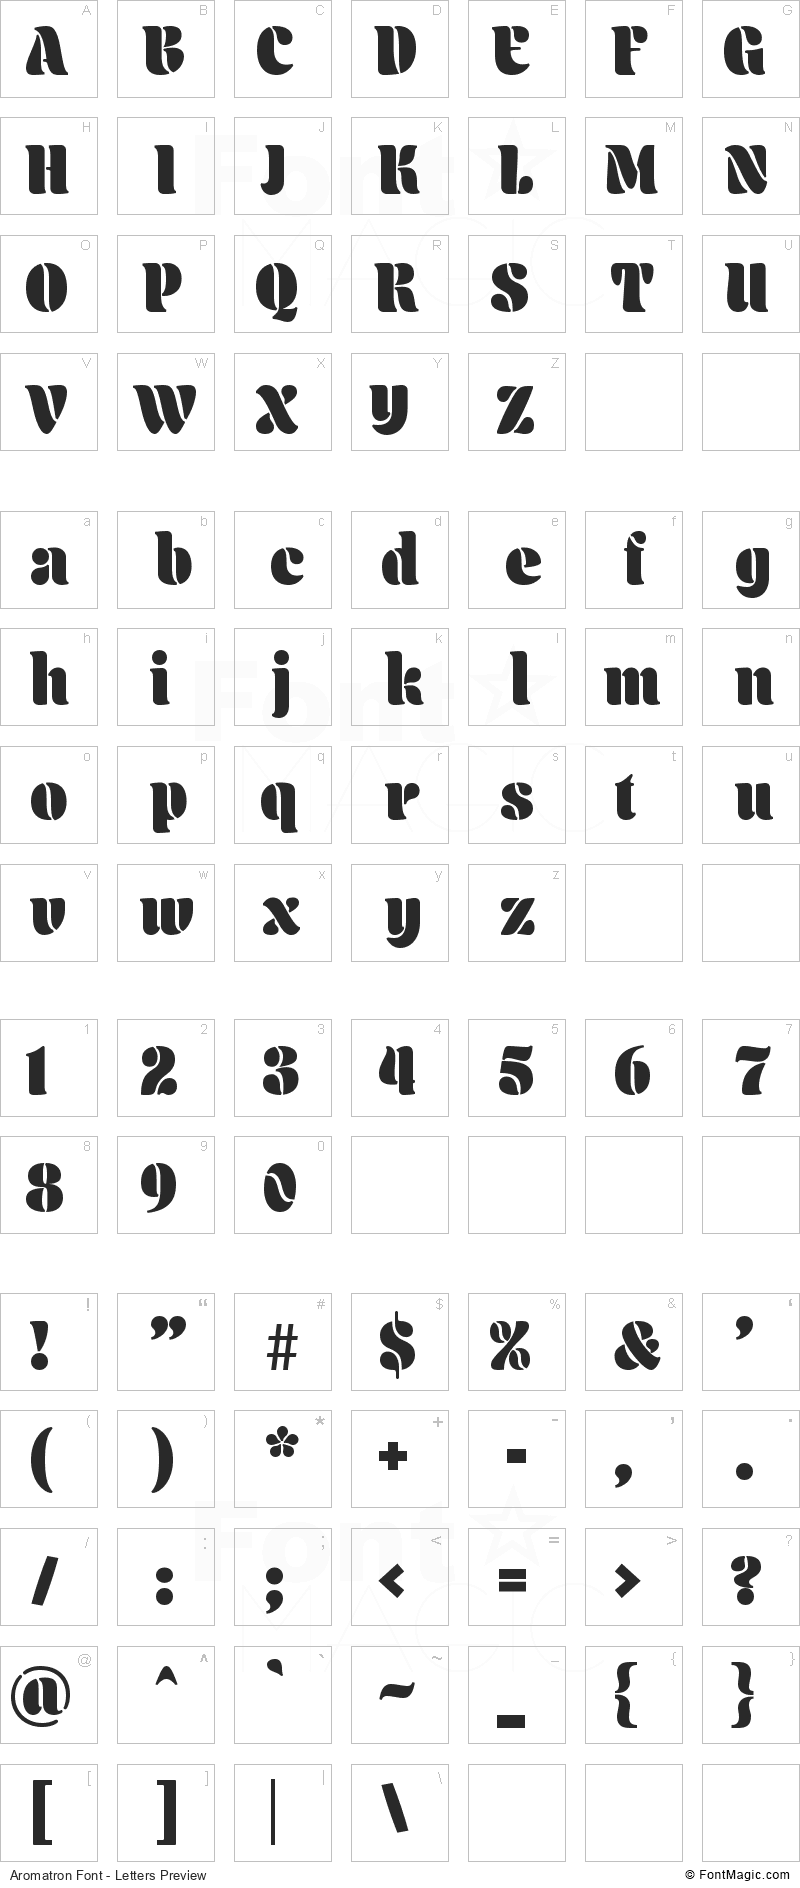 Aromatron Font - All Latters Preview Chart